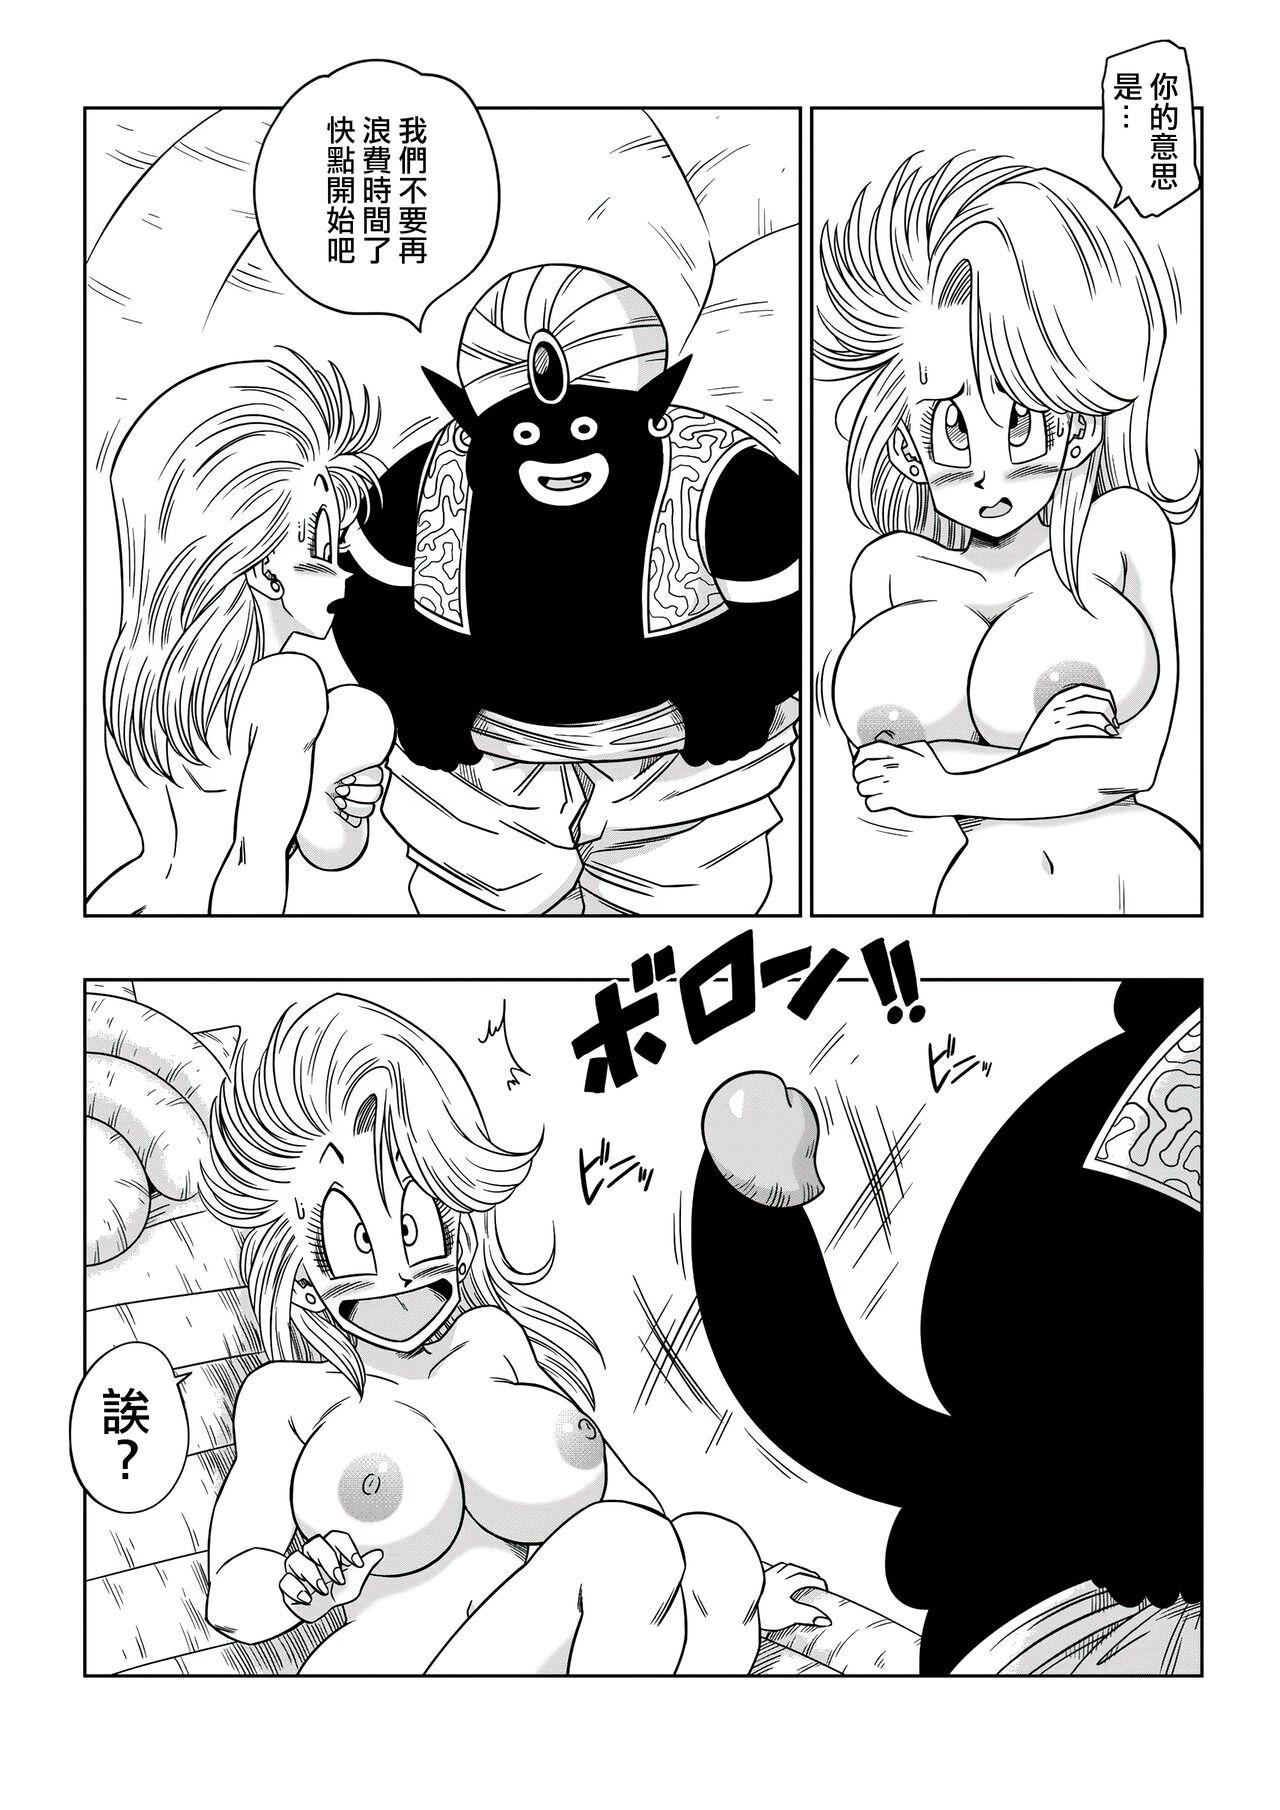 Cameltoe Bulma Meets Mr.Popo - Sex inside the Mysterious Spaceship! - Dragon ball z Daring - Page 8